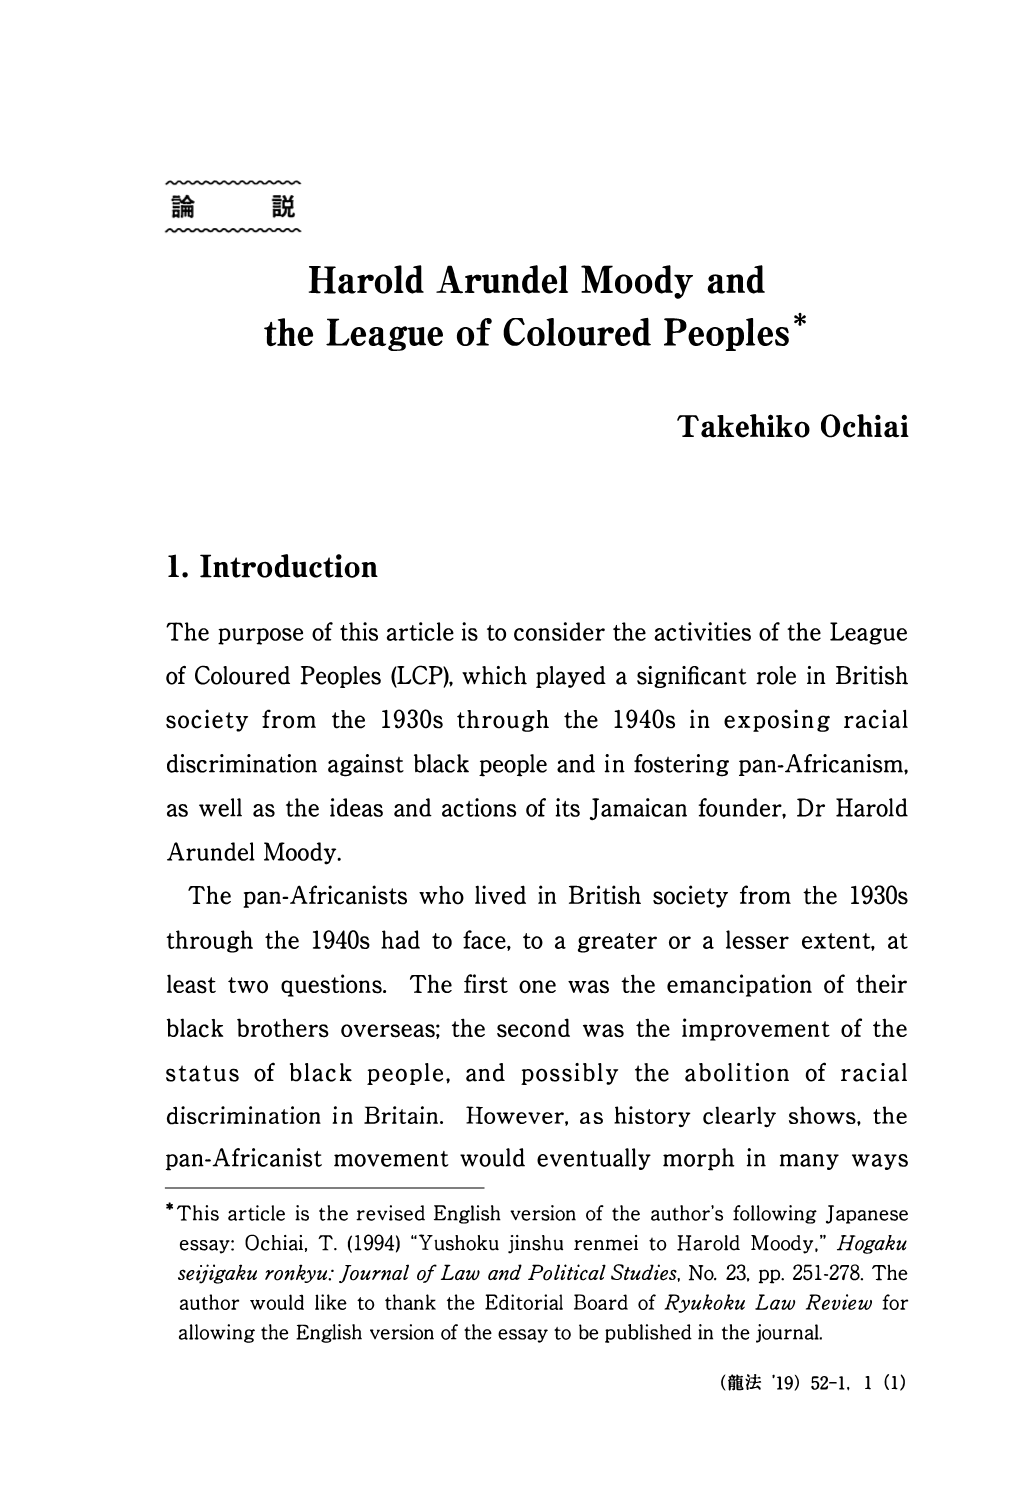 Harold Arundel Moody and the League of Coloured Peoples*